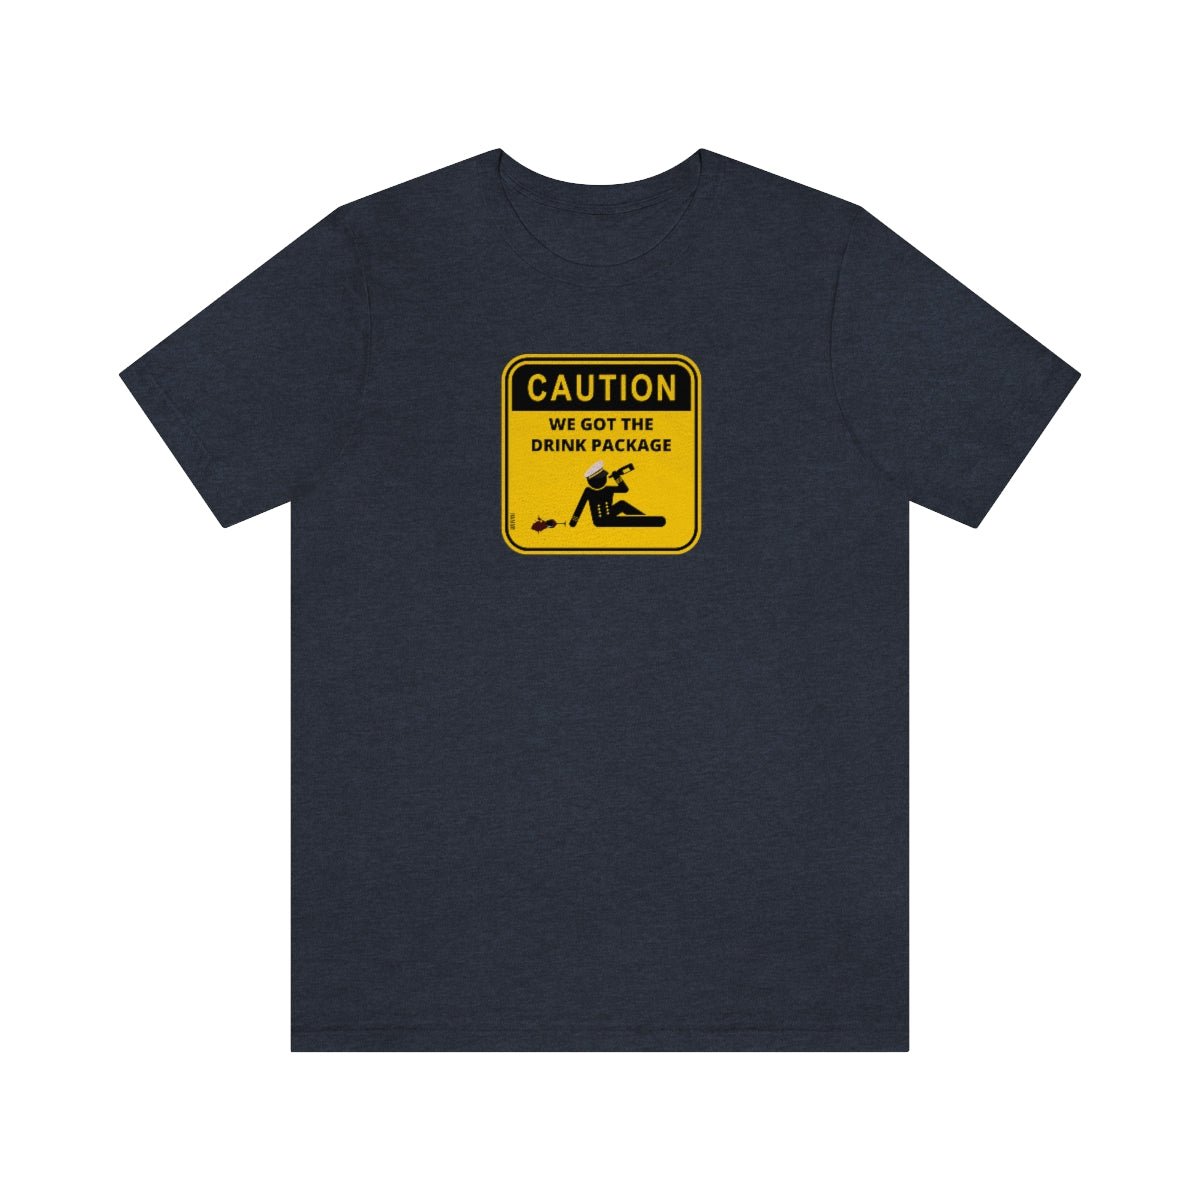 Caution: We Got the Drink Package - Cruise Shirt